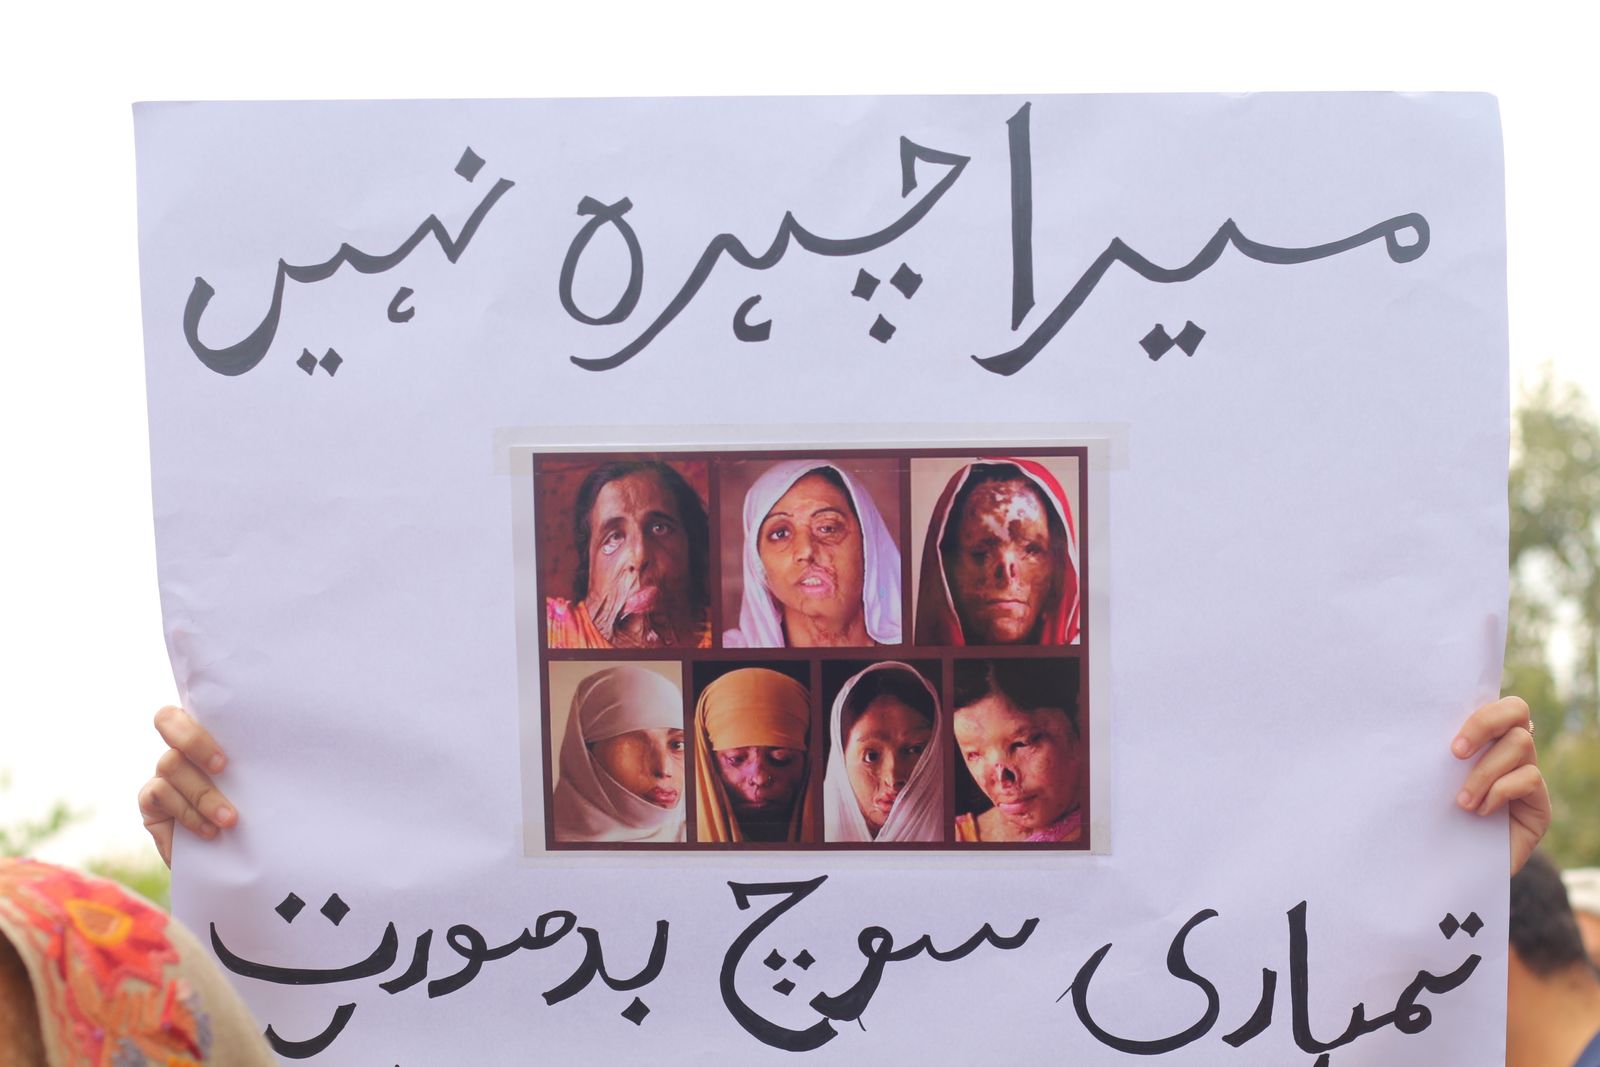 © Maheen Qadri - A placard on domestic violence and acid attack victims. It reads "My face isn't ugly, your thoughts are." Islamabad (2020)